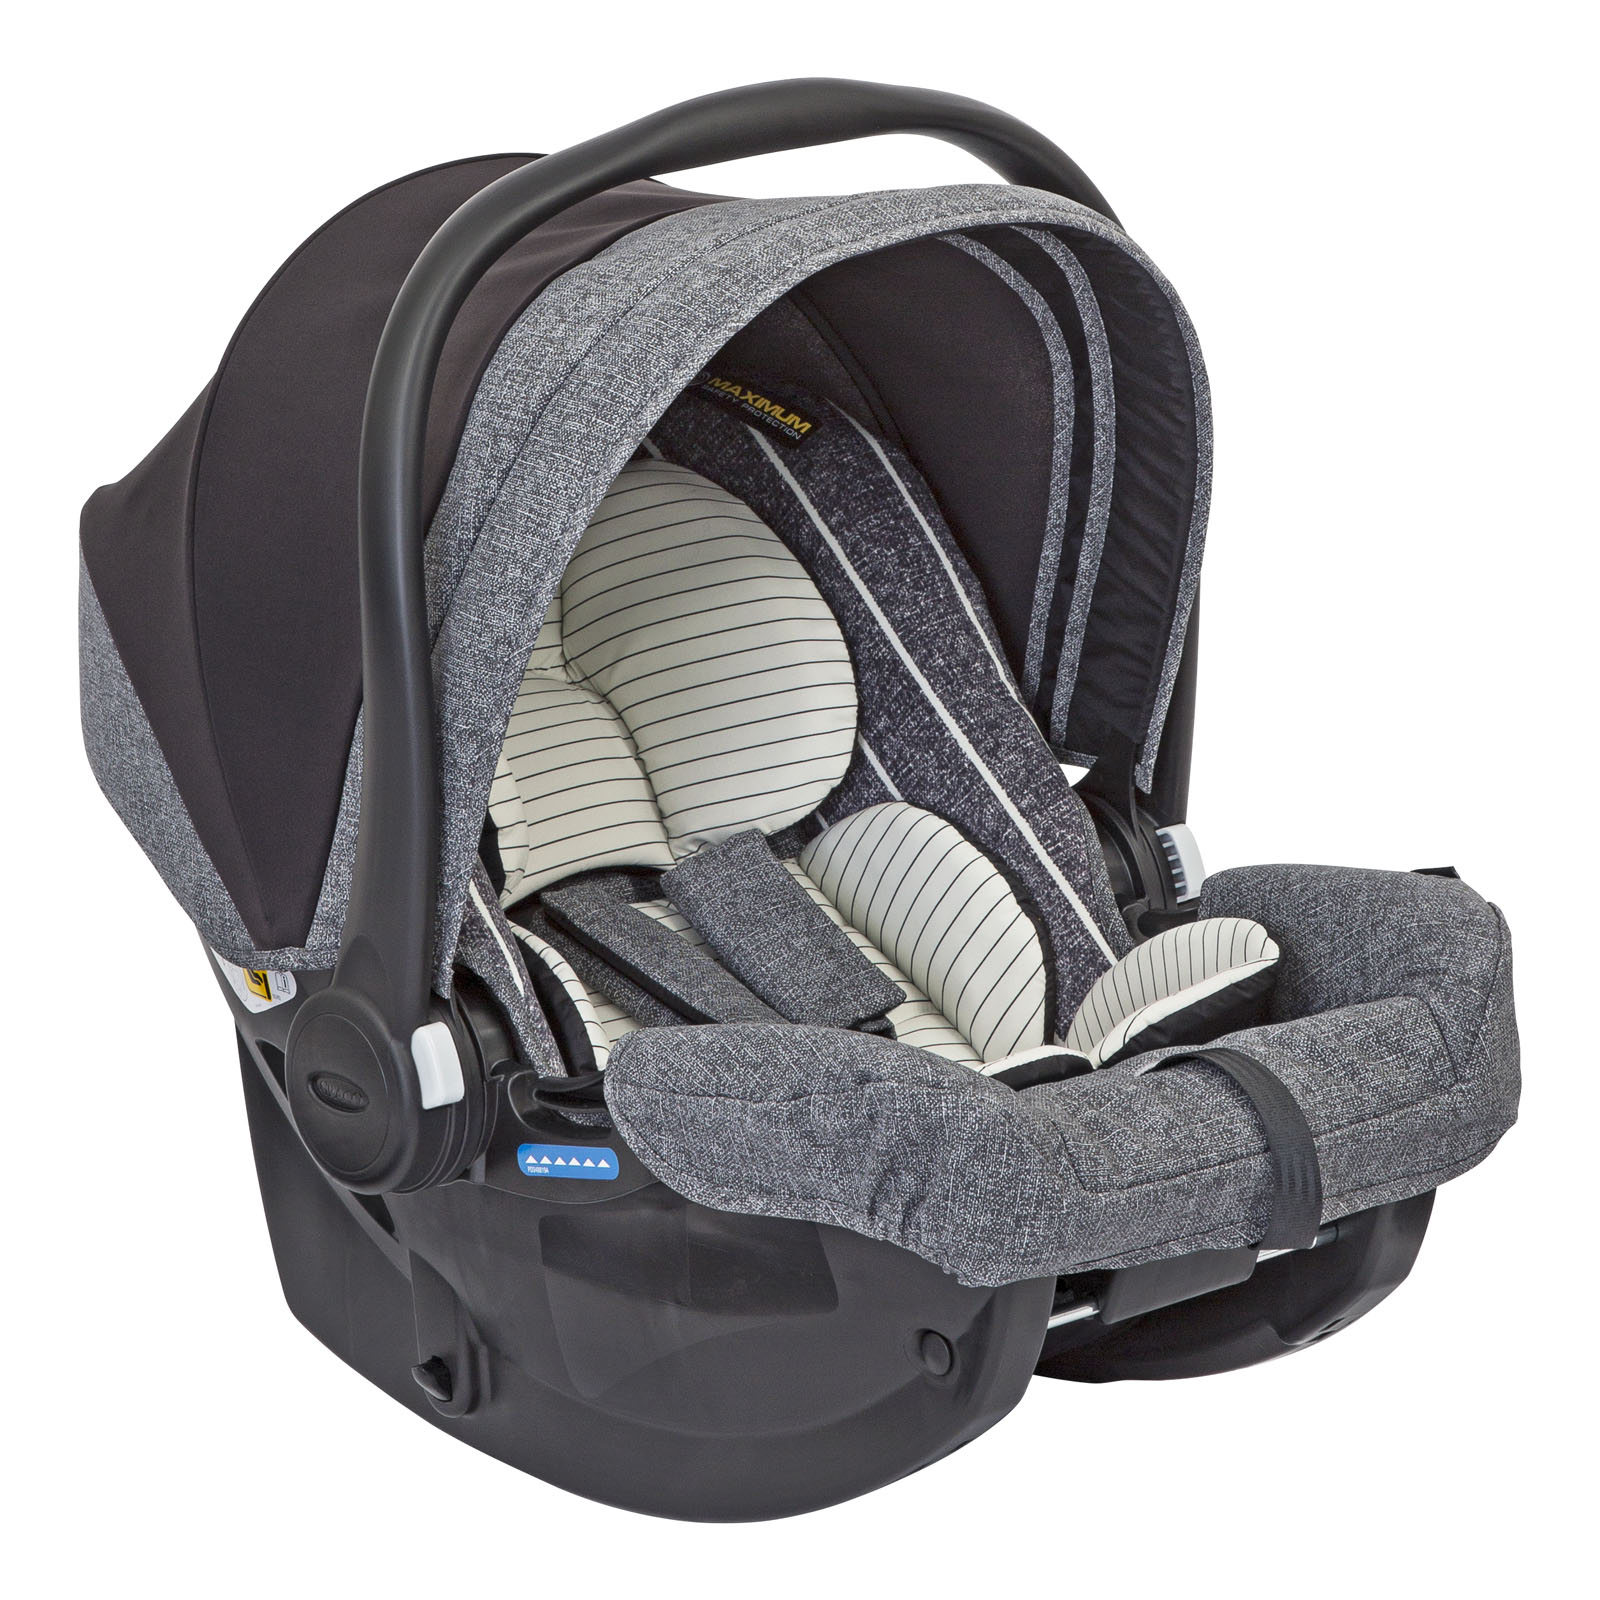 Graco Evo (SnugEssentials Car Seat i-Size) Travel System with Carrycot